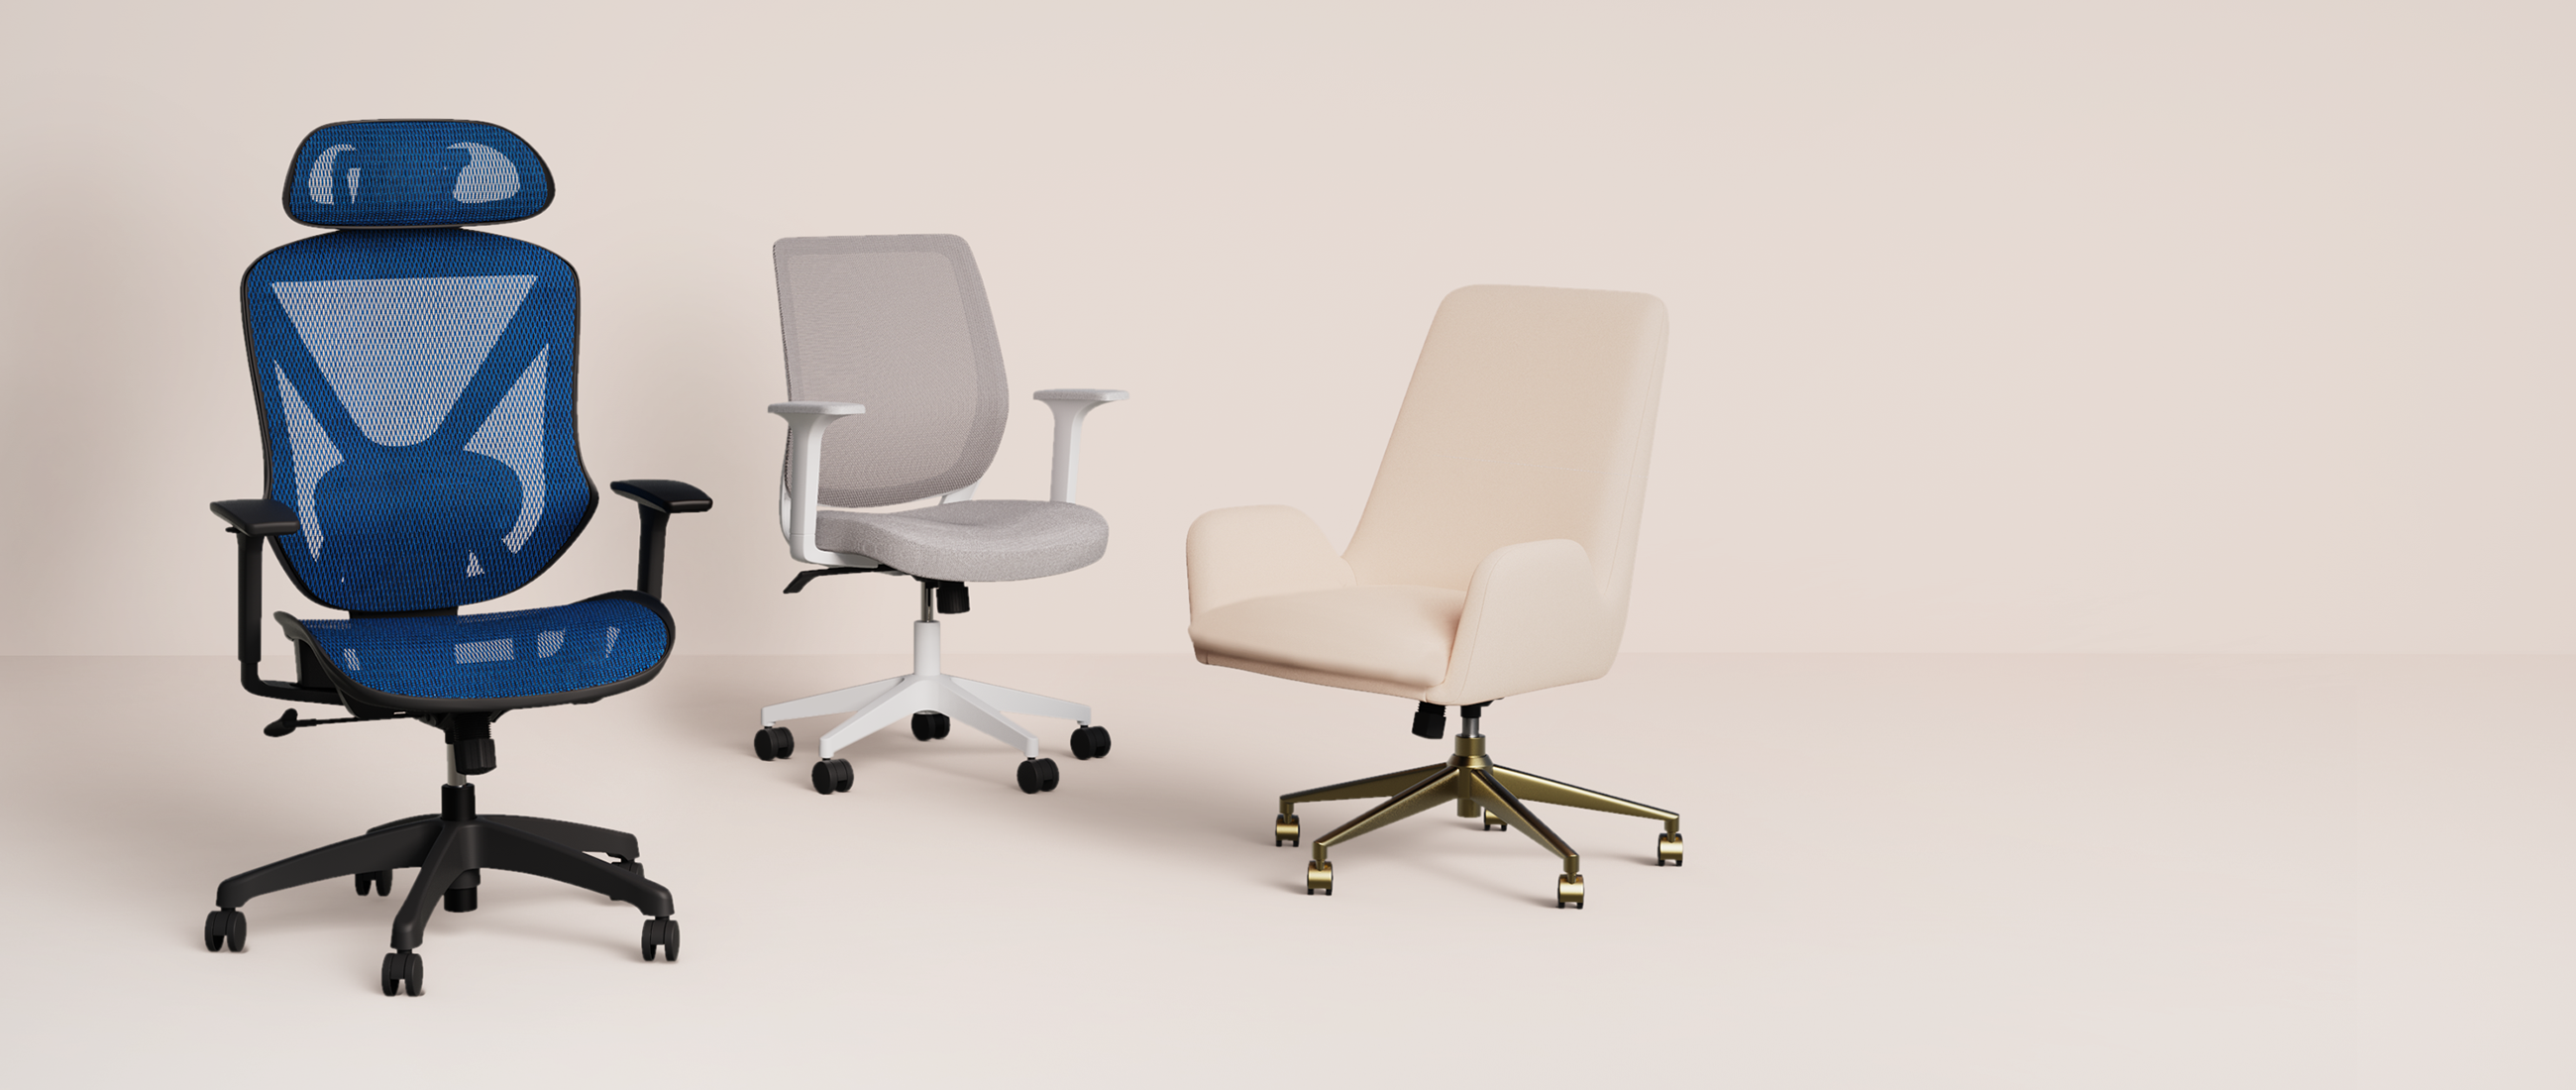 task chair, mesh chair, and fabric chair